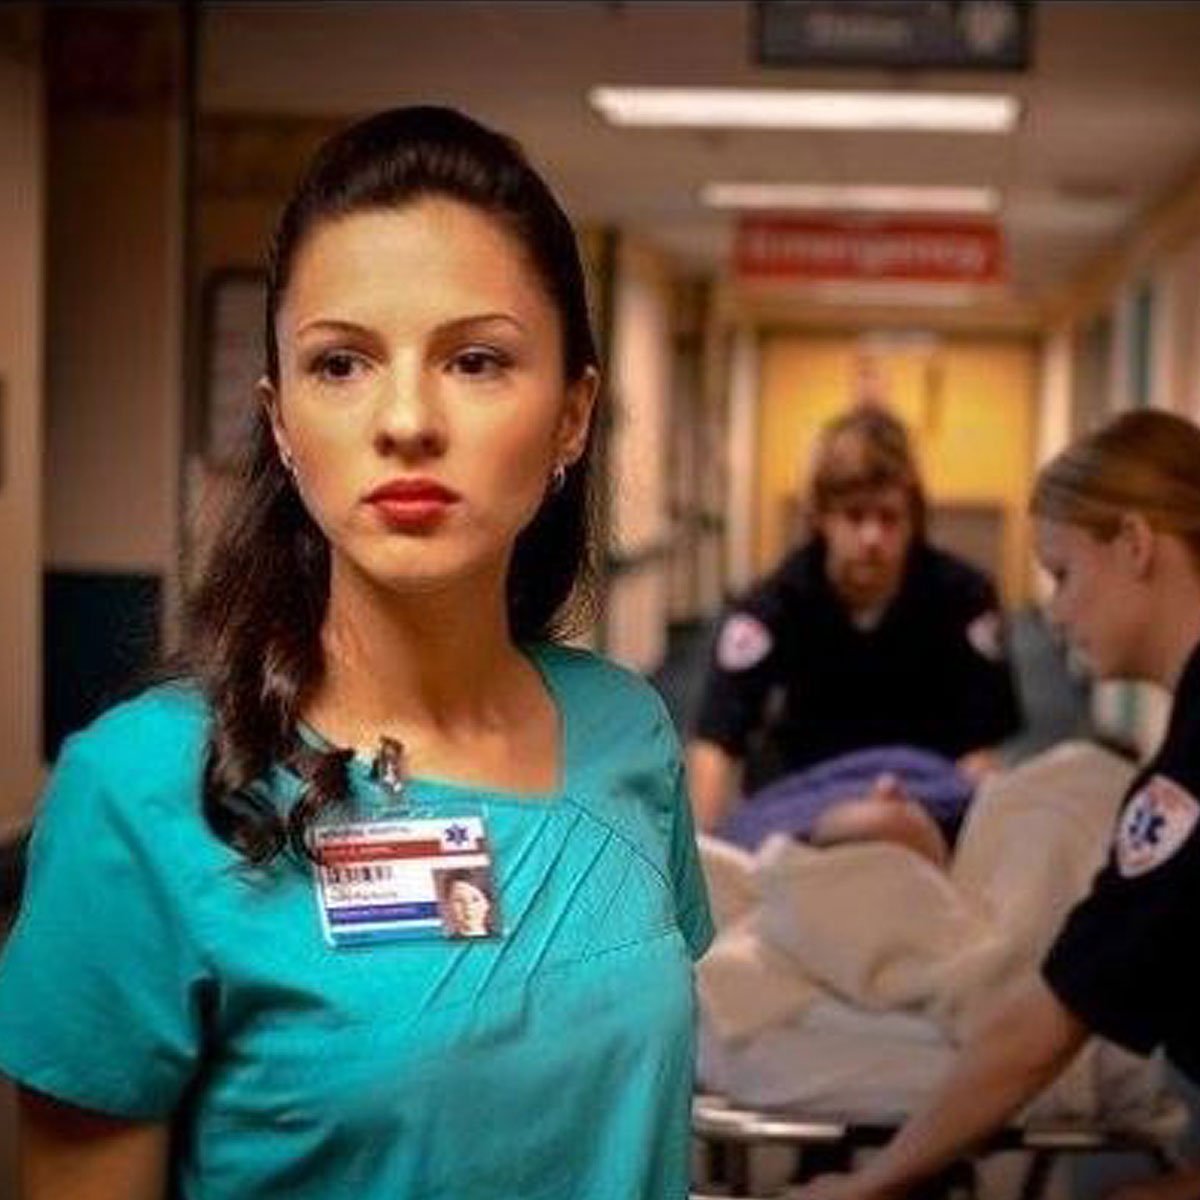 ‘Sally Pacholok’ – A film based on the true story of an ER nurse who takes on the medical establishment when she uncovers an epidemic of misdiagnosis.